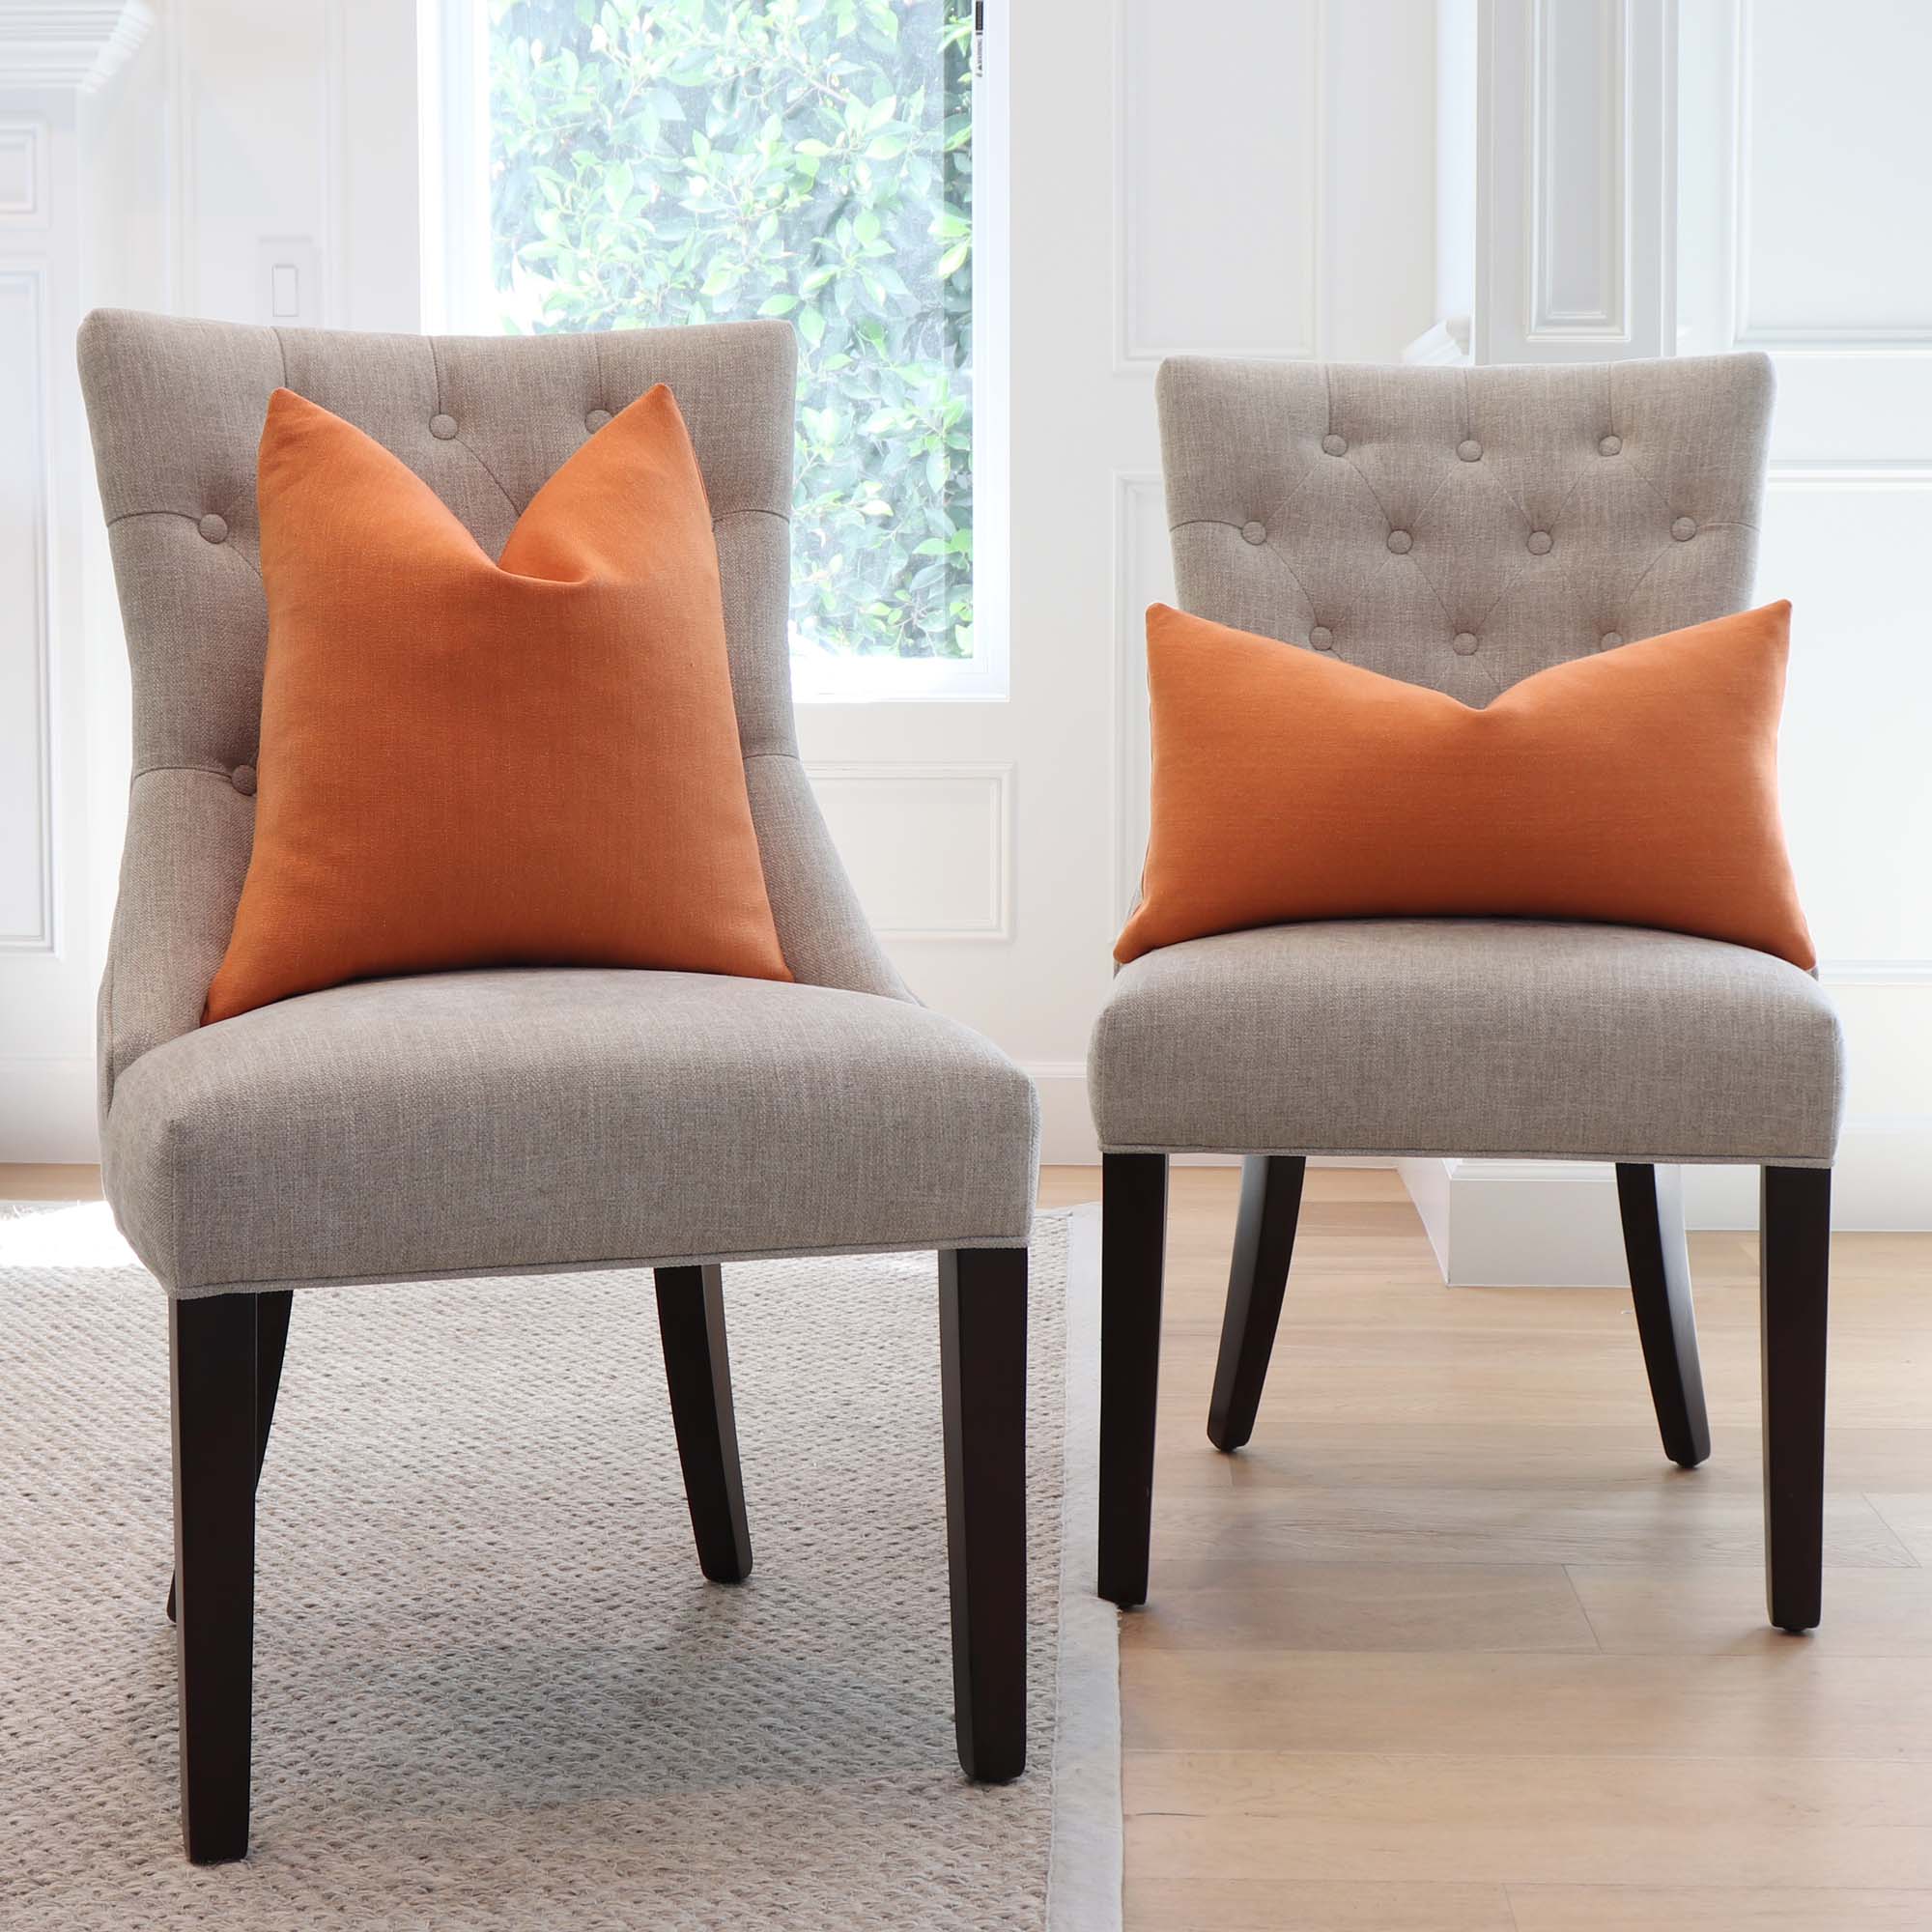 https://www.chloeandolive.com/cdn/shop/products/Tay-Pumpkin-Orange-Solid-Linen-Decorative-Throw-Pillow-Cover-on-Dining-Chairs-in-Home_5000x.jpg?v=1651120237